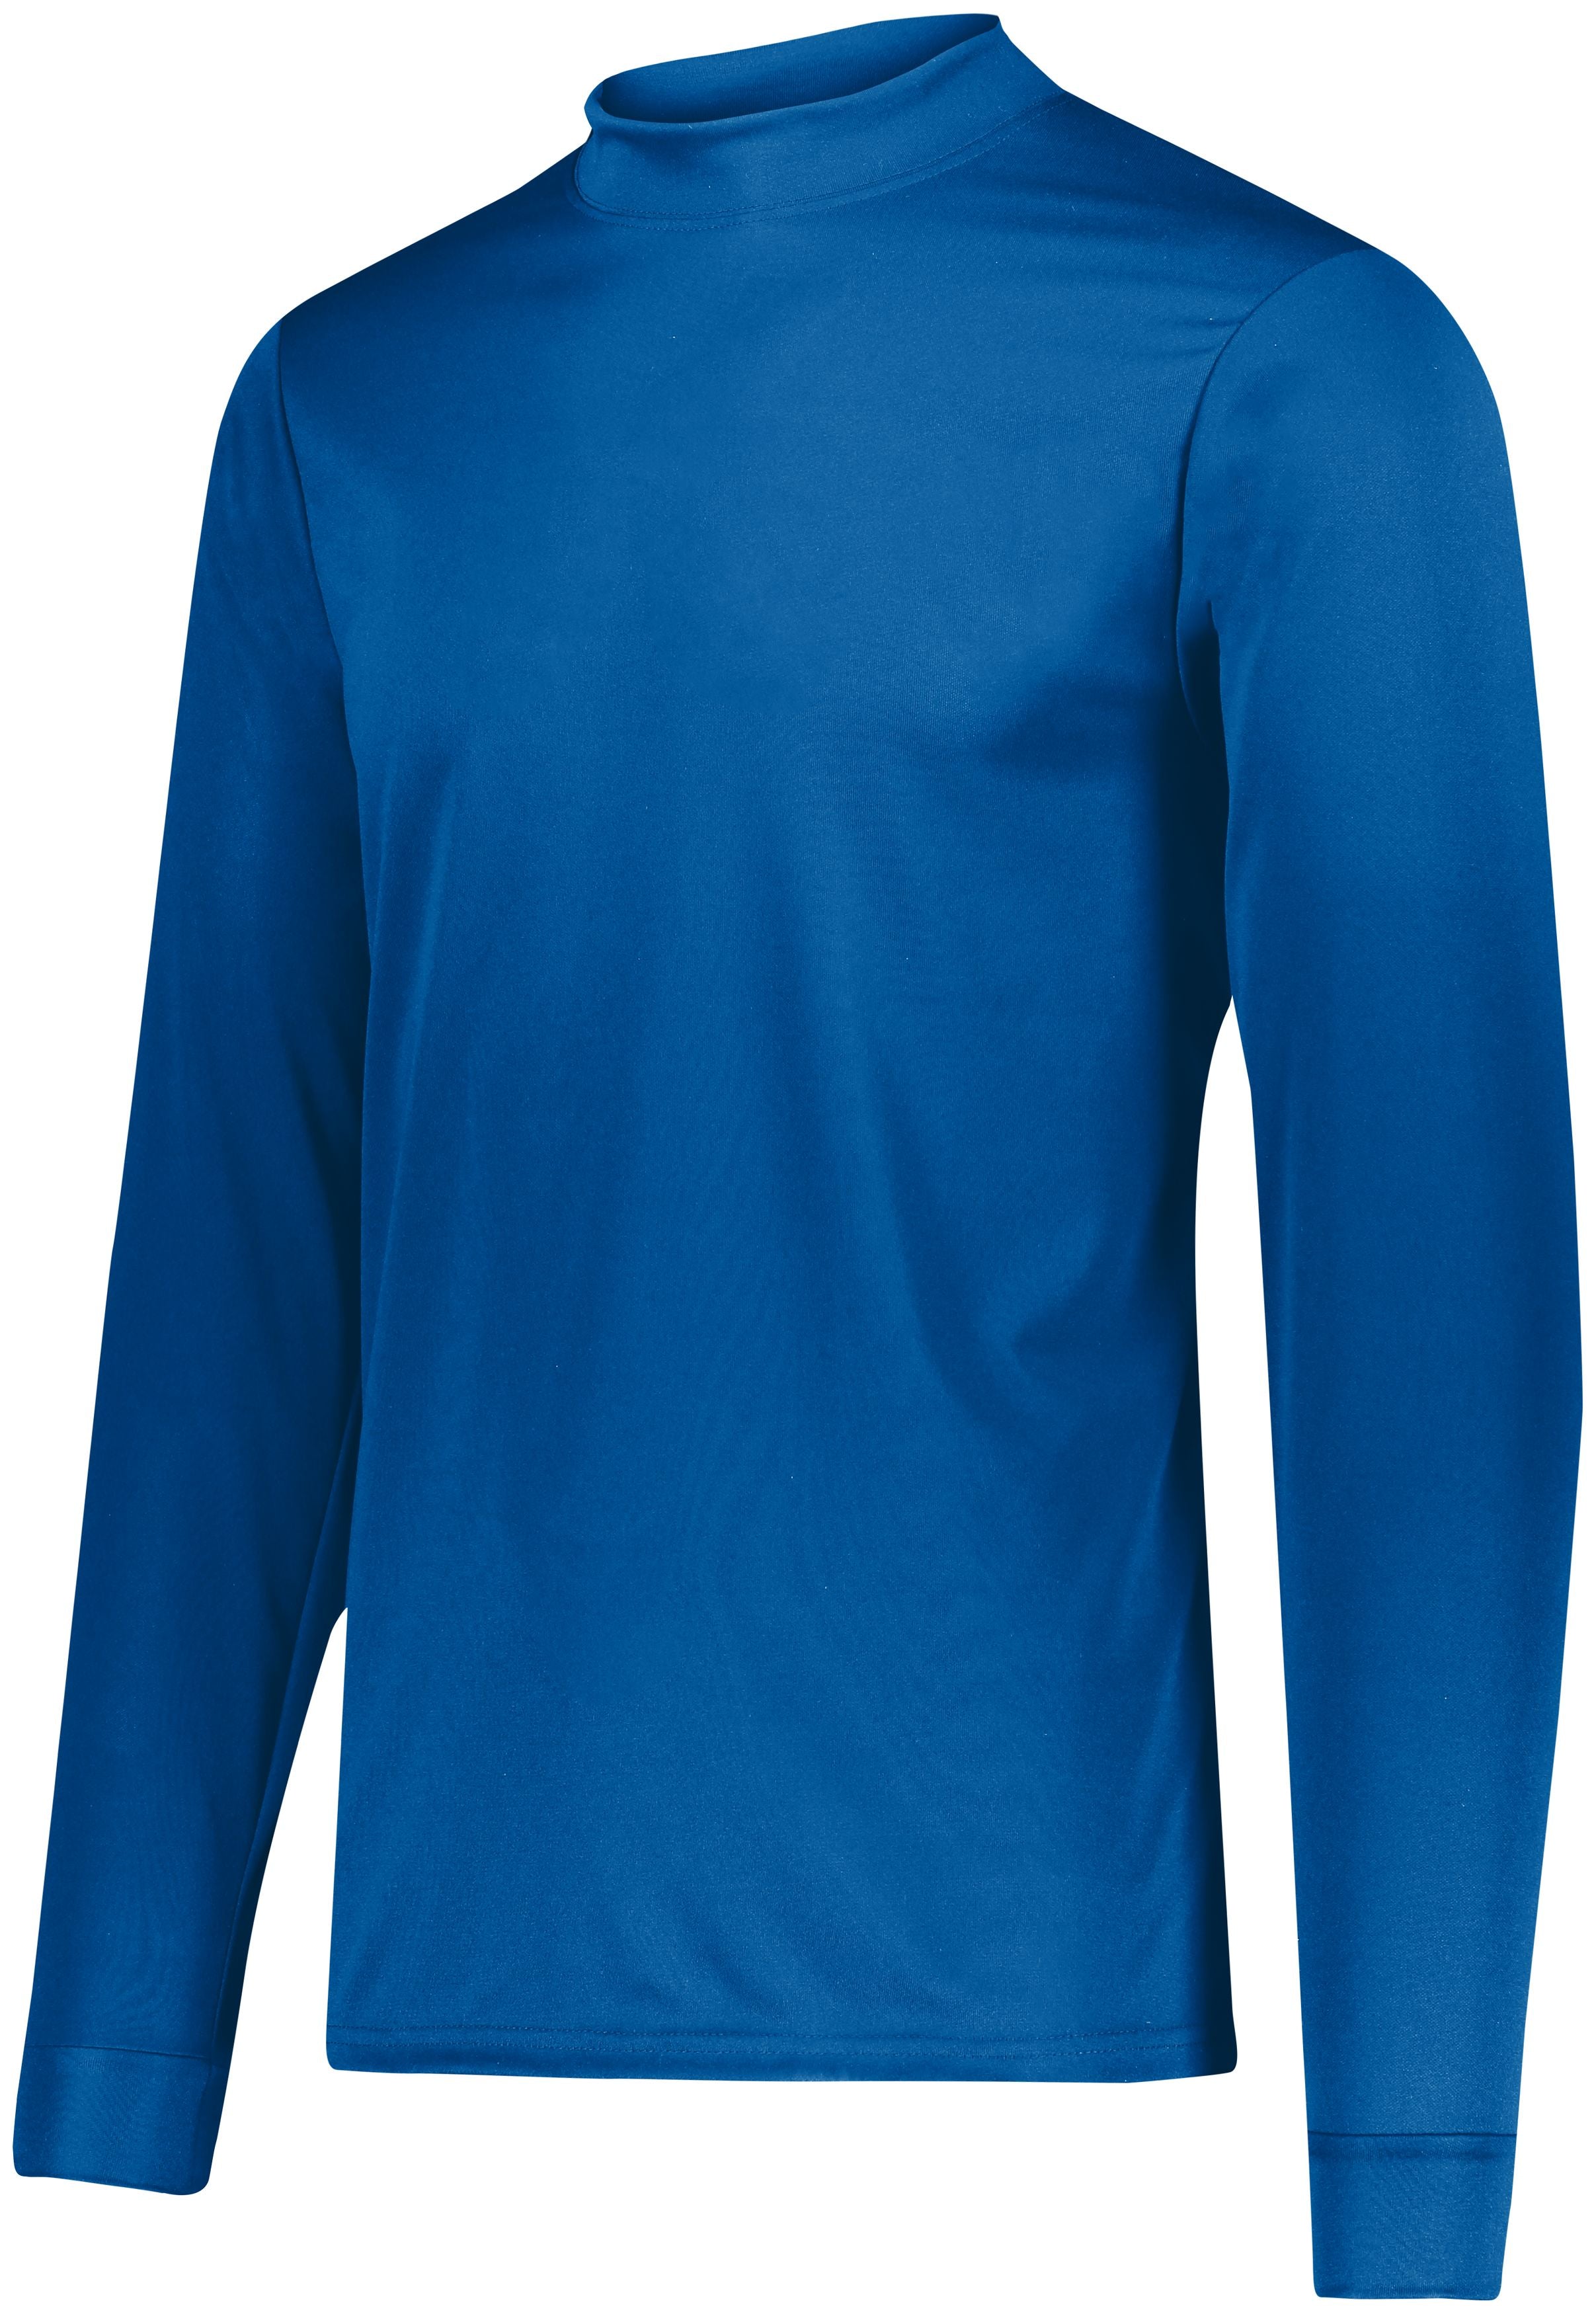 Augusta Sportswear Wicking Mock Turtleneck in Royal  -Part of the Adult, Augusta-Products, Tennis, Shirts product lines at KanaleyCreations.com